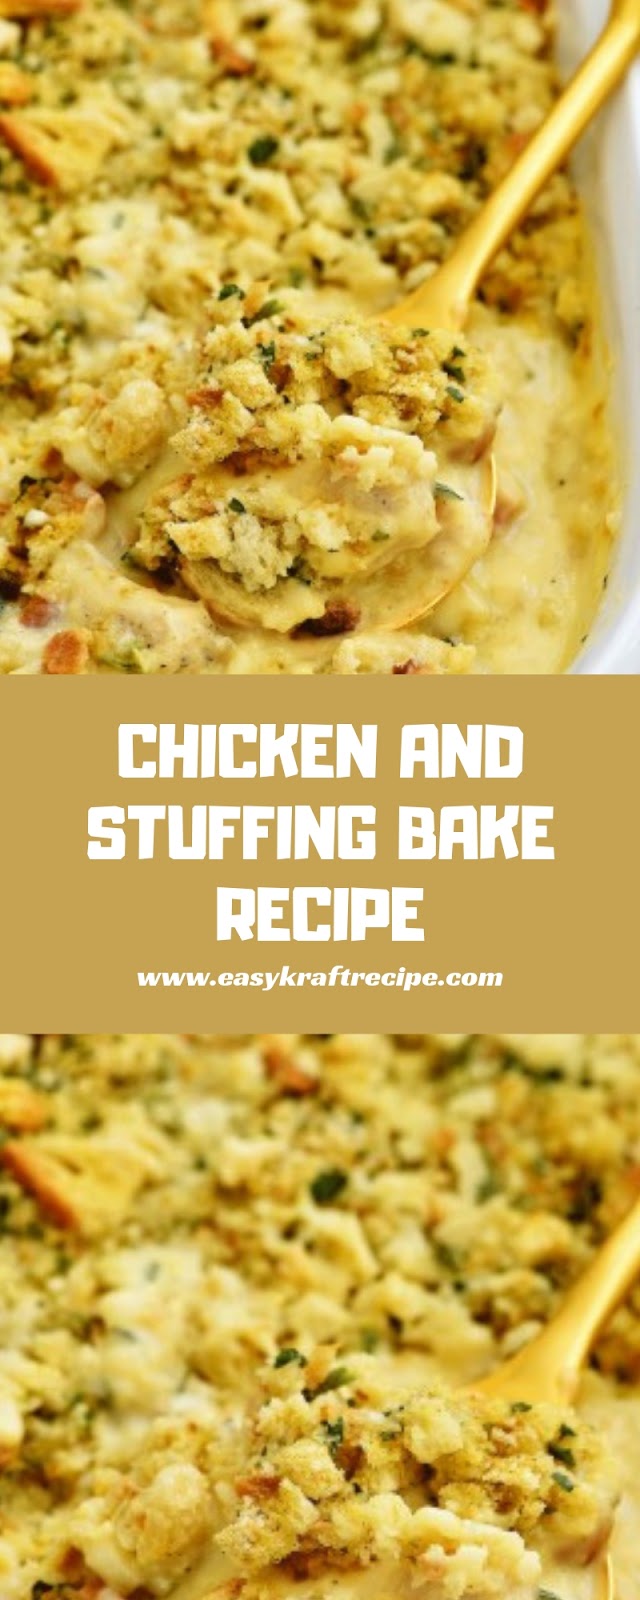 CHICKEN AND STUFFING BAKE